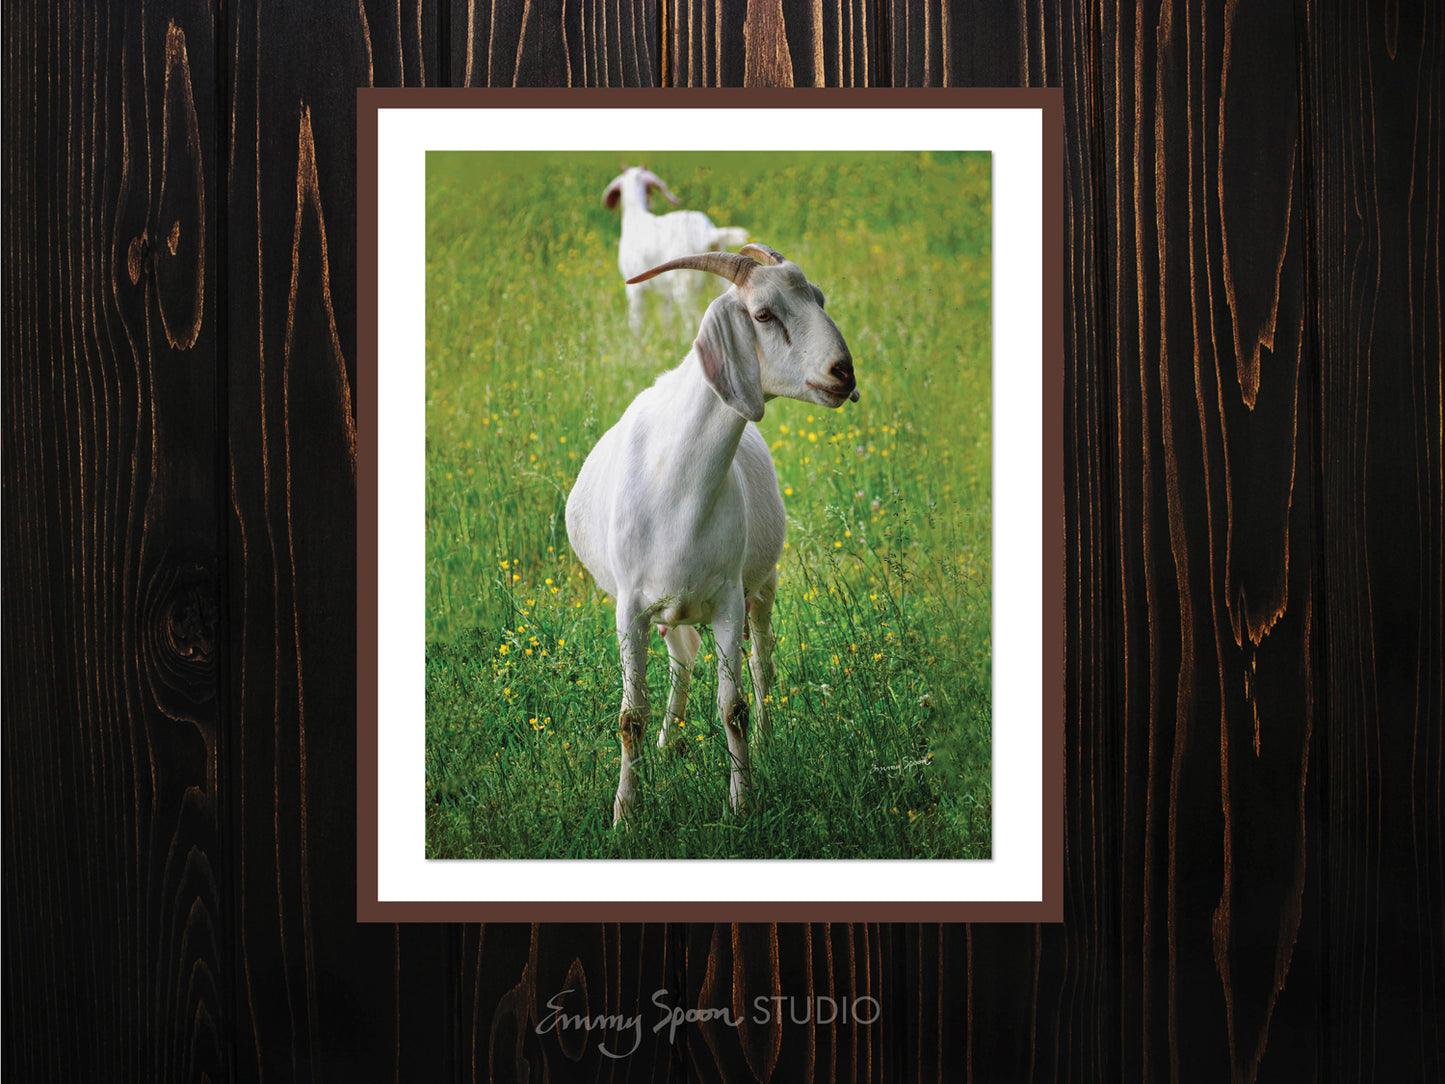 Goats 8x10 Digital Download by Emmy Spoon